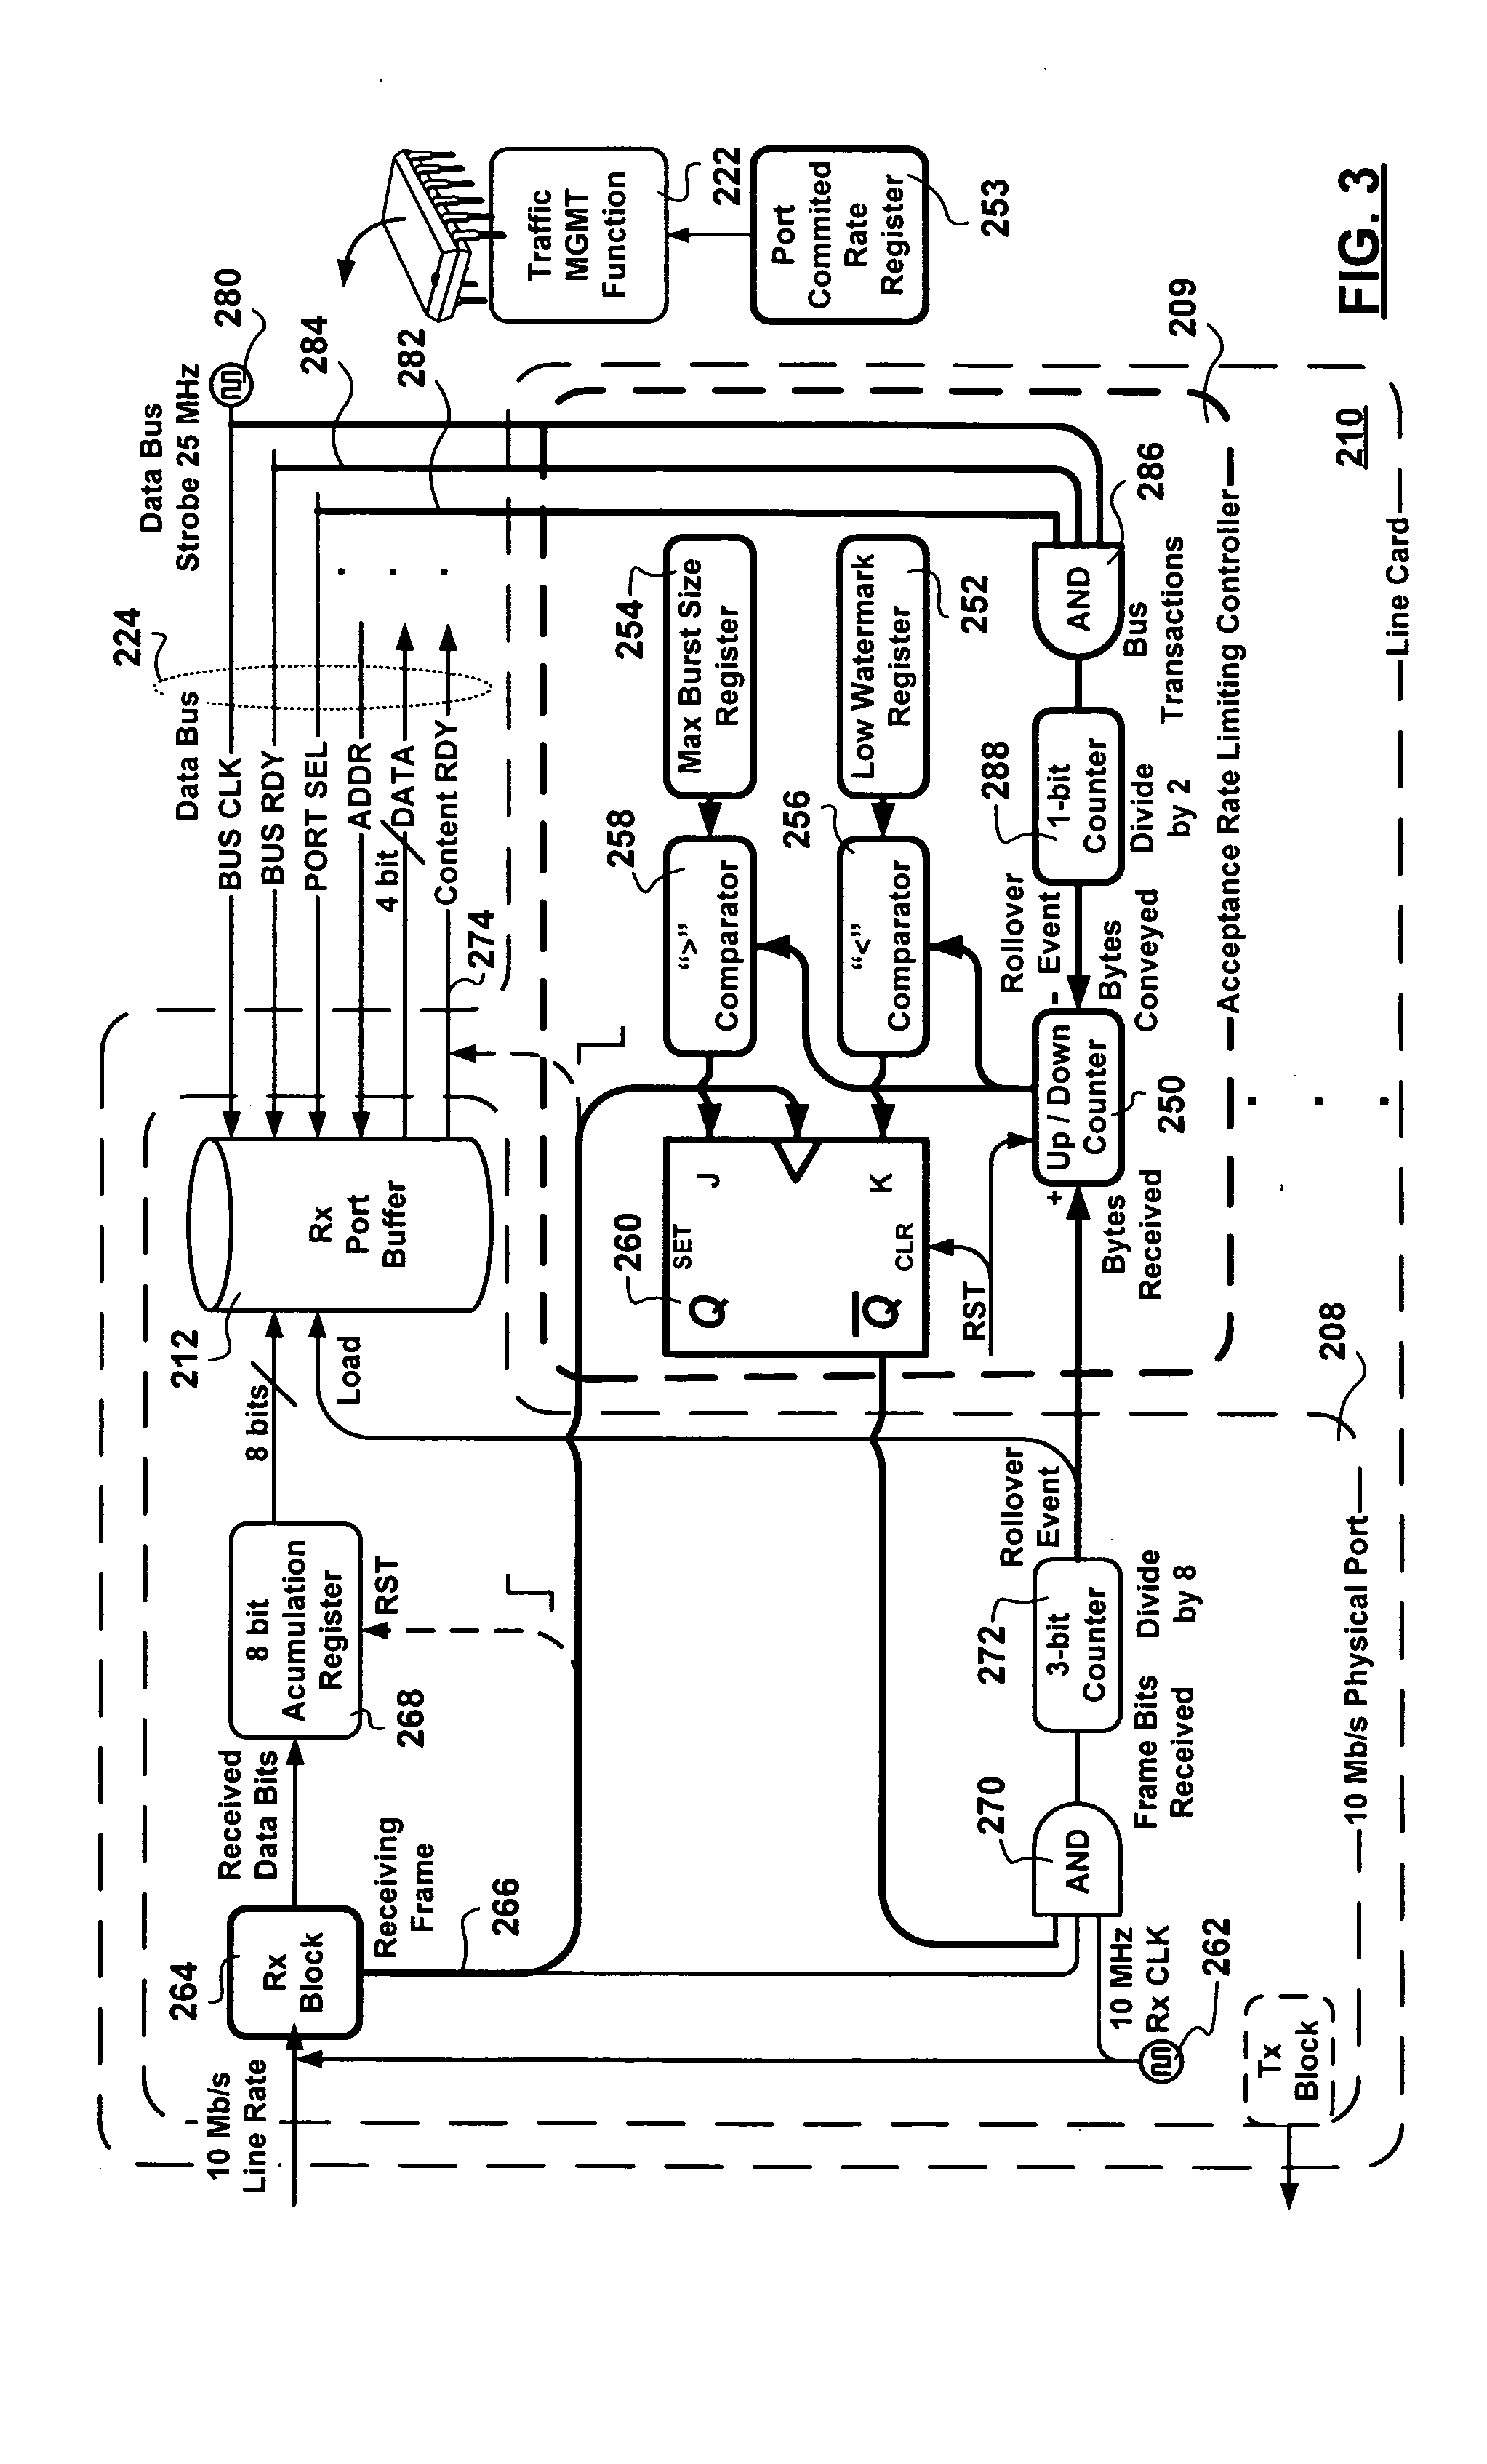 Line card port protection rate limiter circuitry